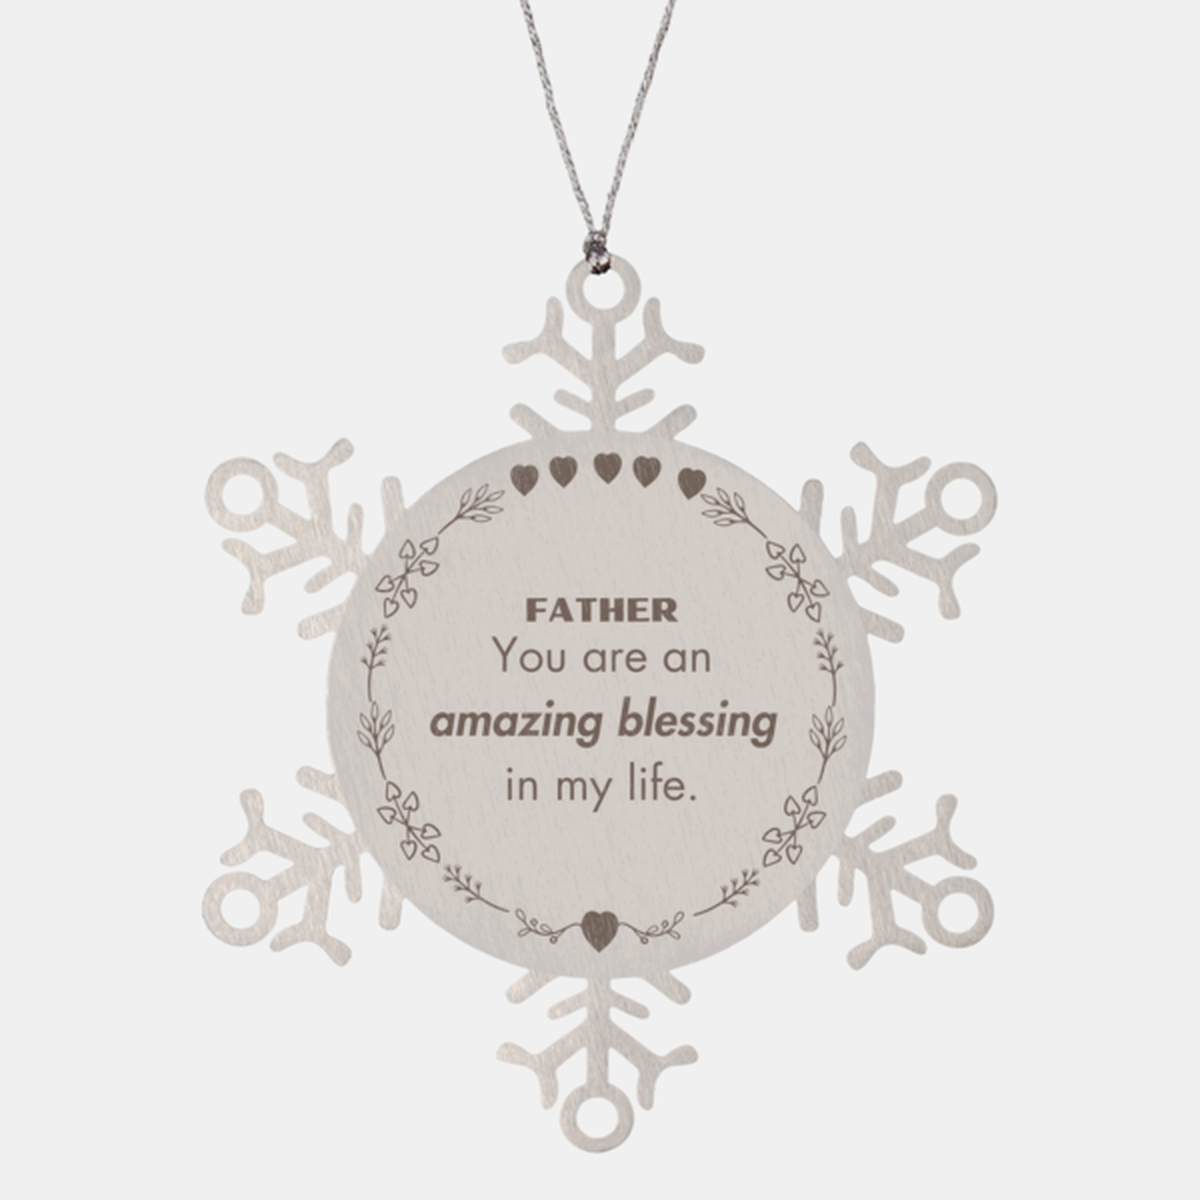 Father Snowflake Ornament, You are an amazing blessing in my life, Thank You Gifts For Father, Inspirational Birthday Christmas Unique Gifts For Father